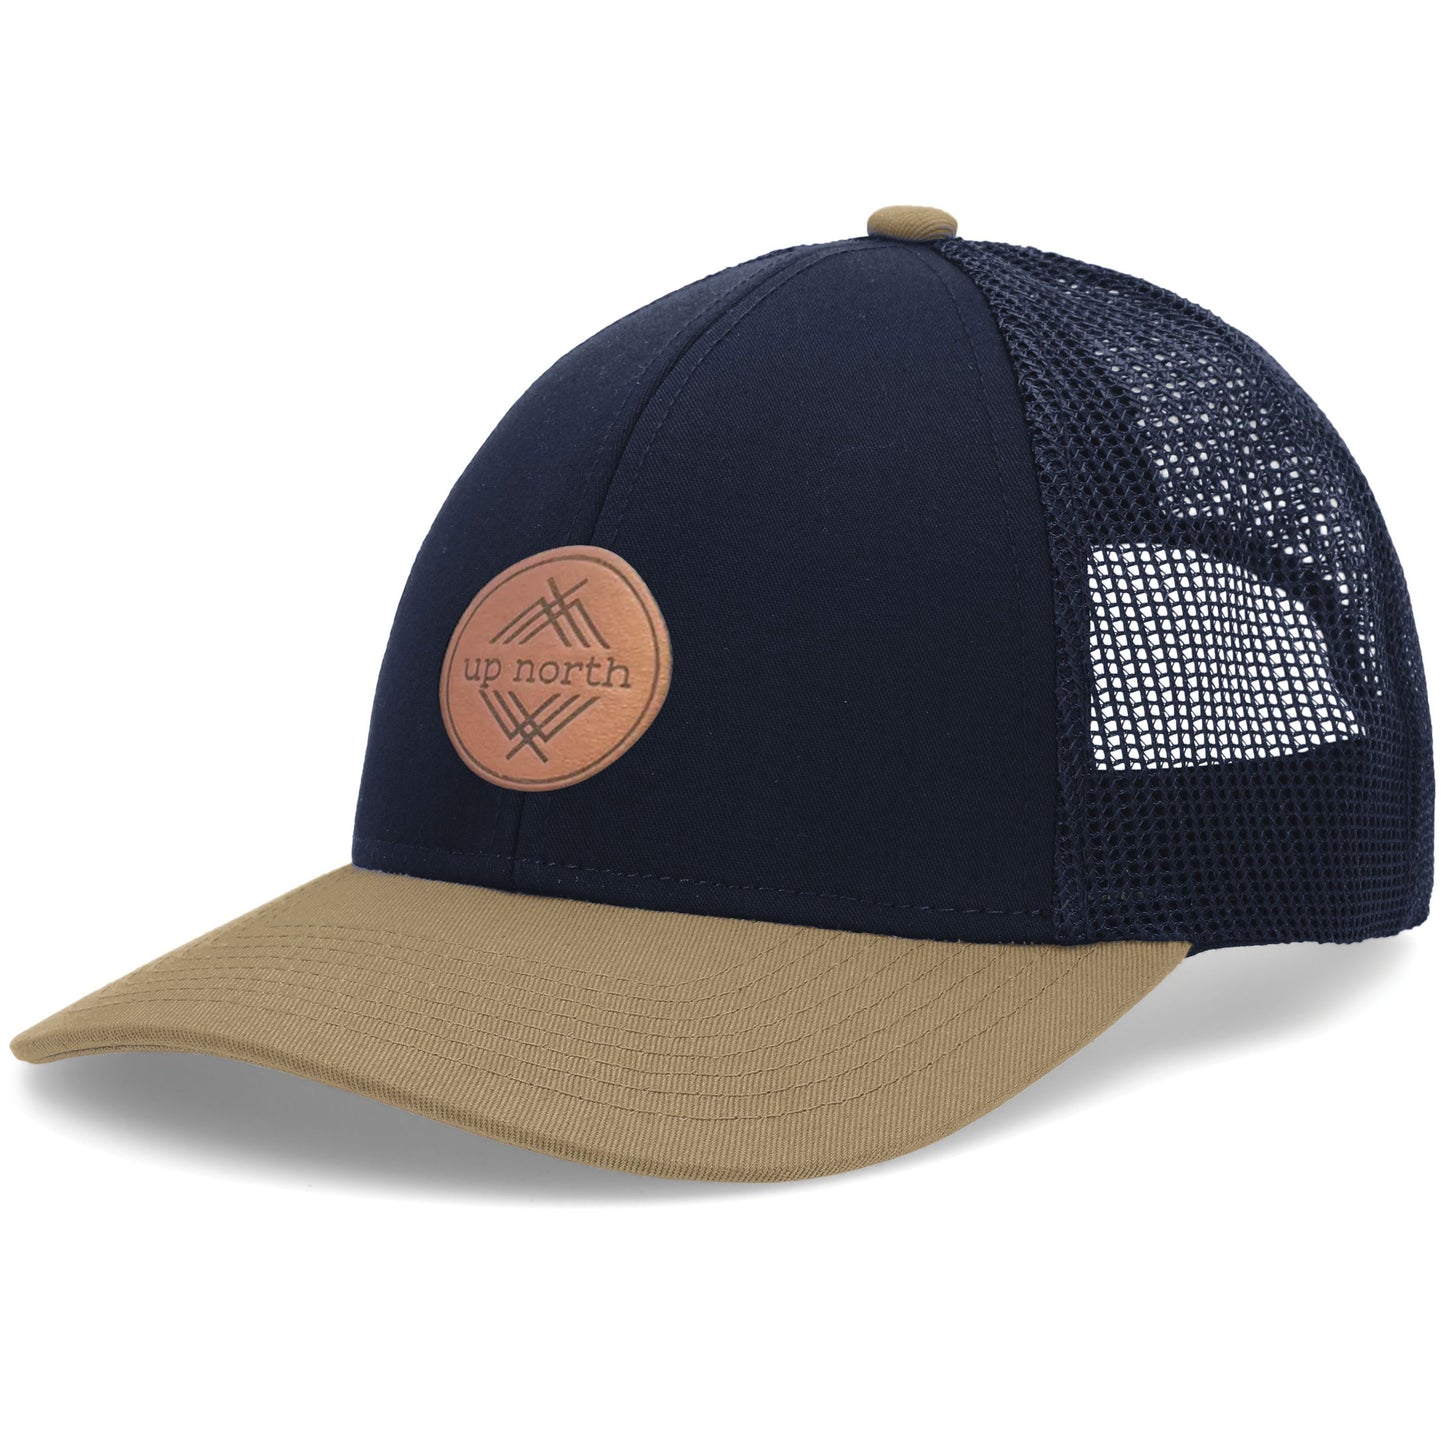 Up North Low Profile Mesh Back Hat - Navy/Buck